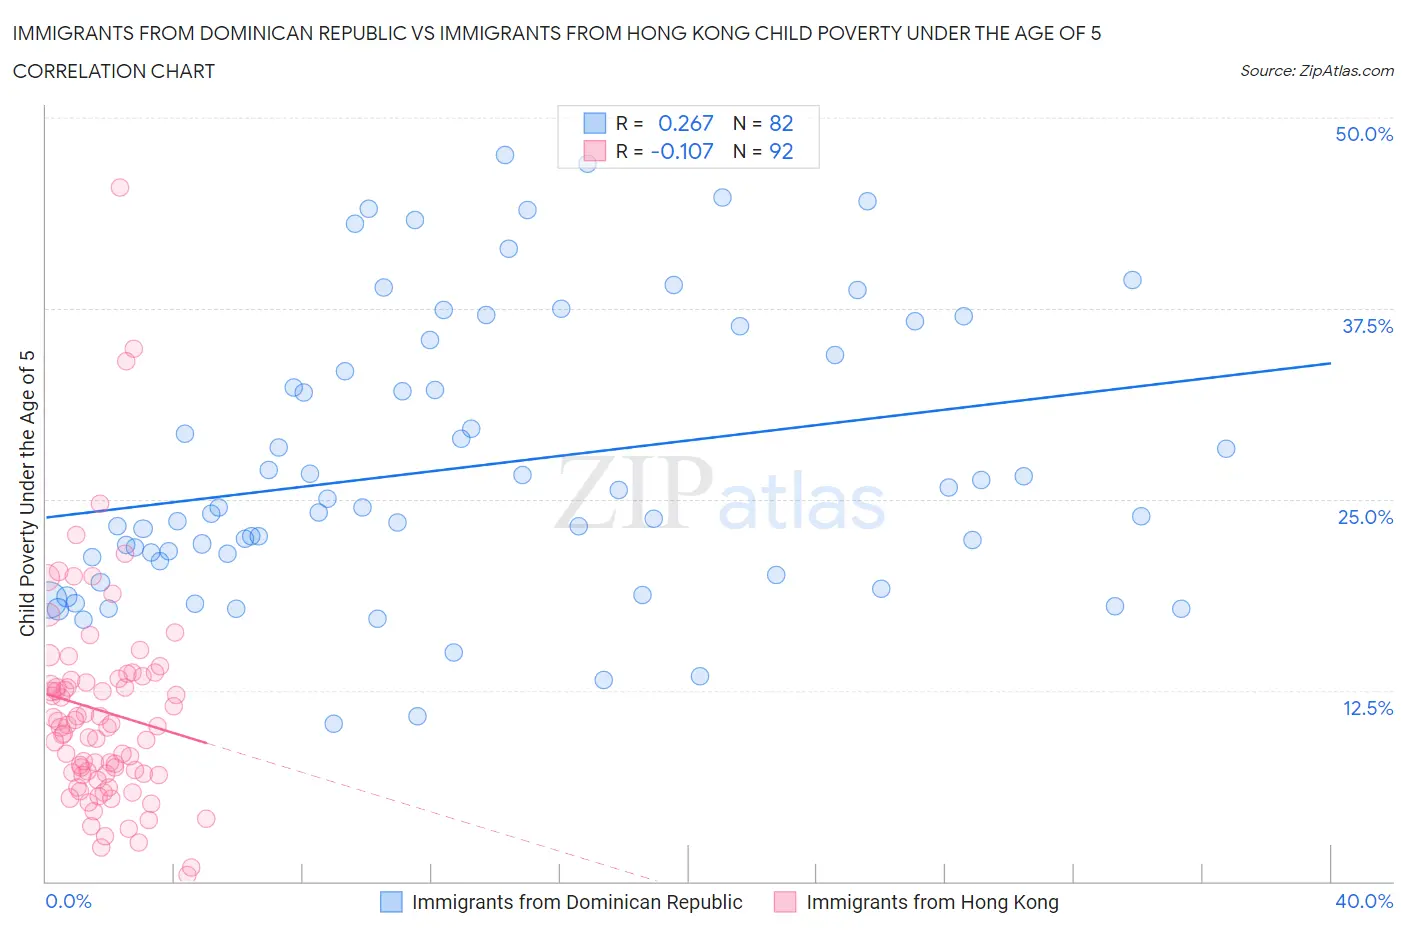 Immigrants from Dominican Republic vs Immigrants from Hong Kong Child Poverty Under the Age of 5